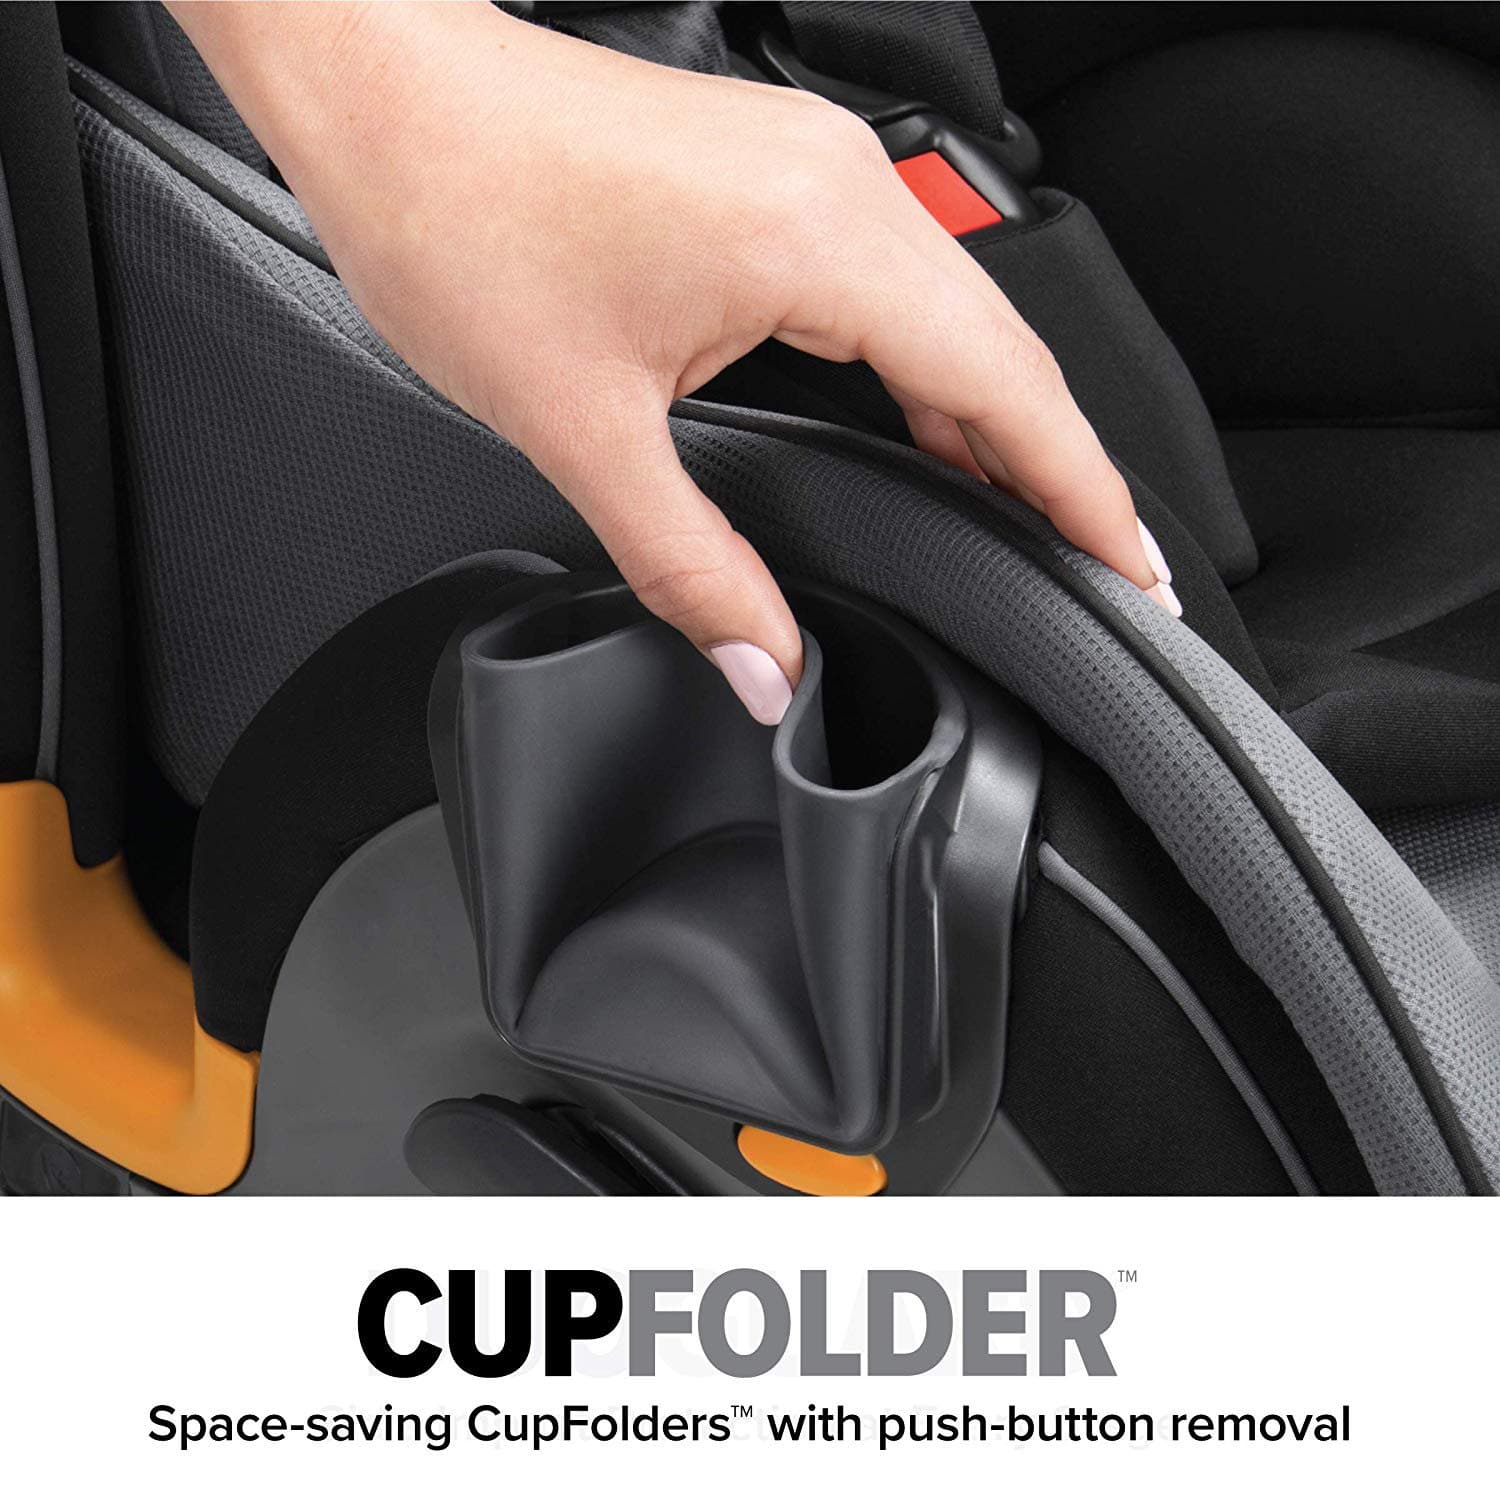 FIT4 4-IN-1 CONVERTIBLE CAR SEAT ONYX